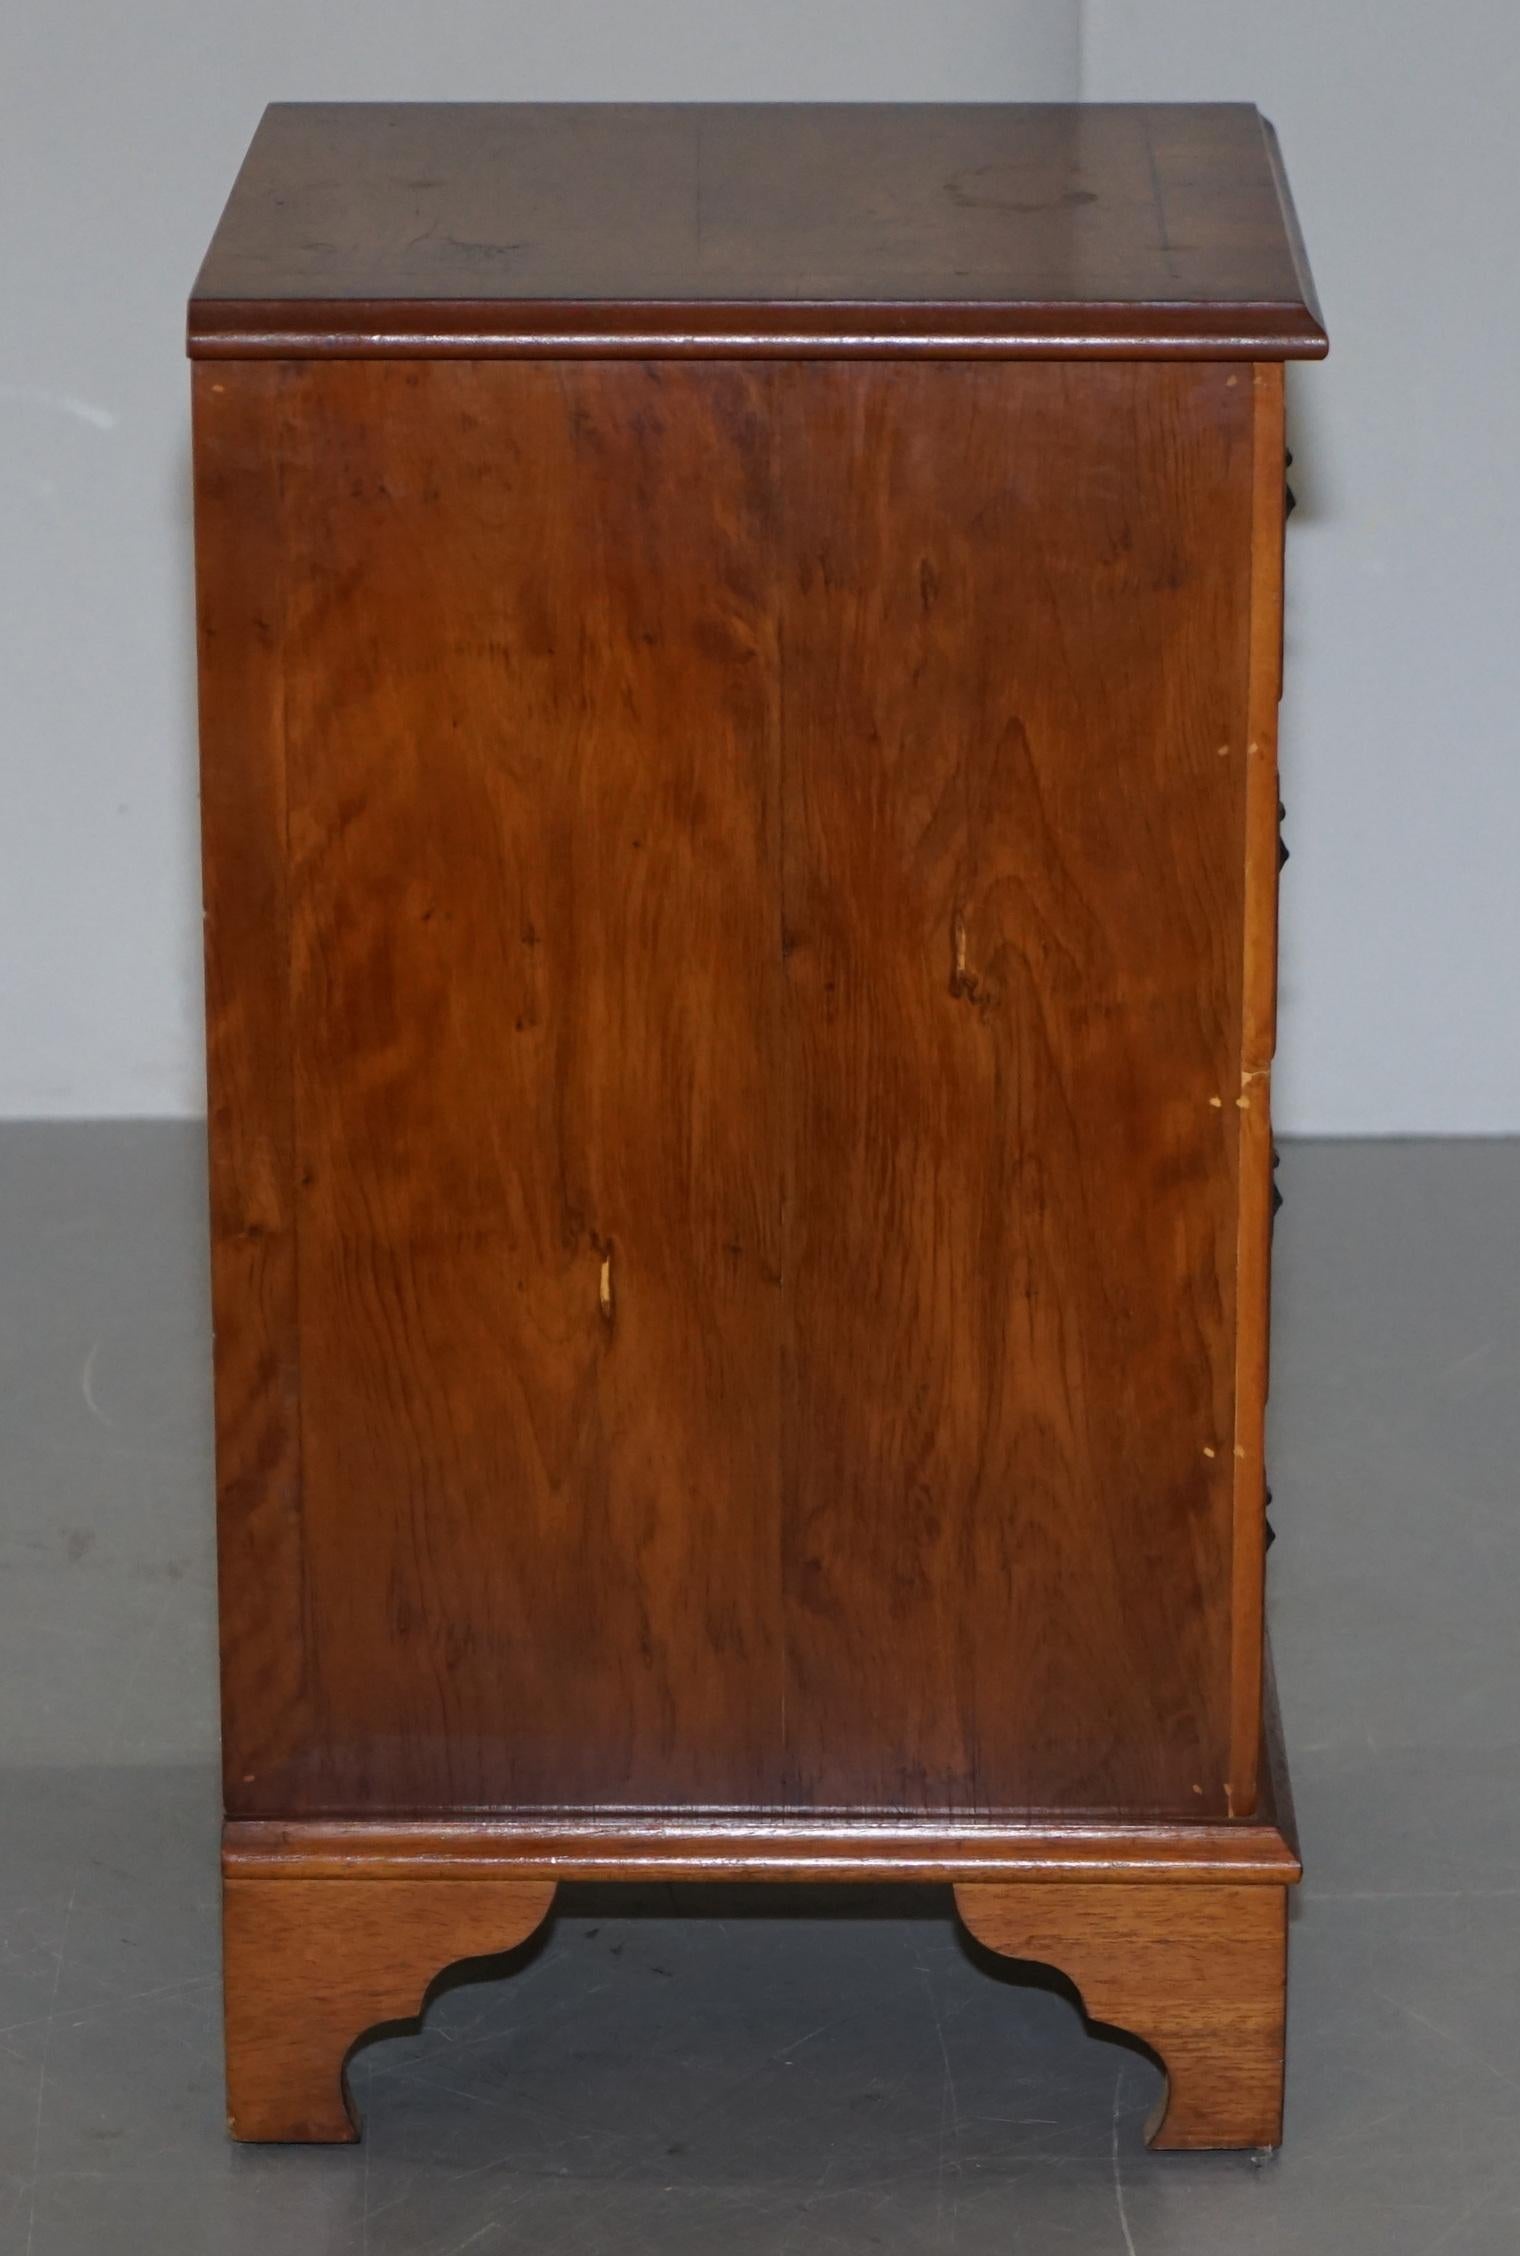 Lovely Burr Yew Wood Side Table Sized Chest of Drawers Georgian Style Very Fine 1